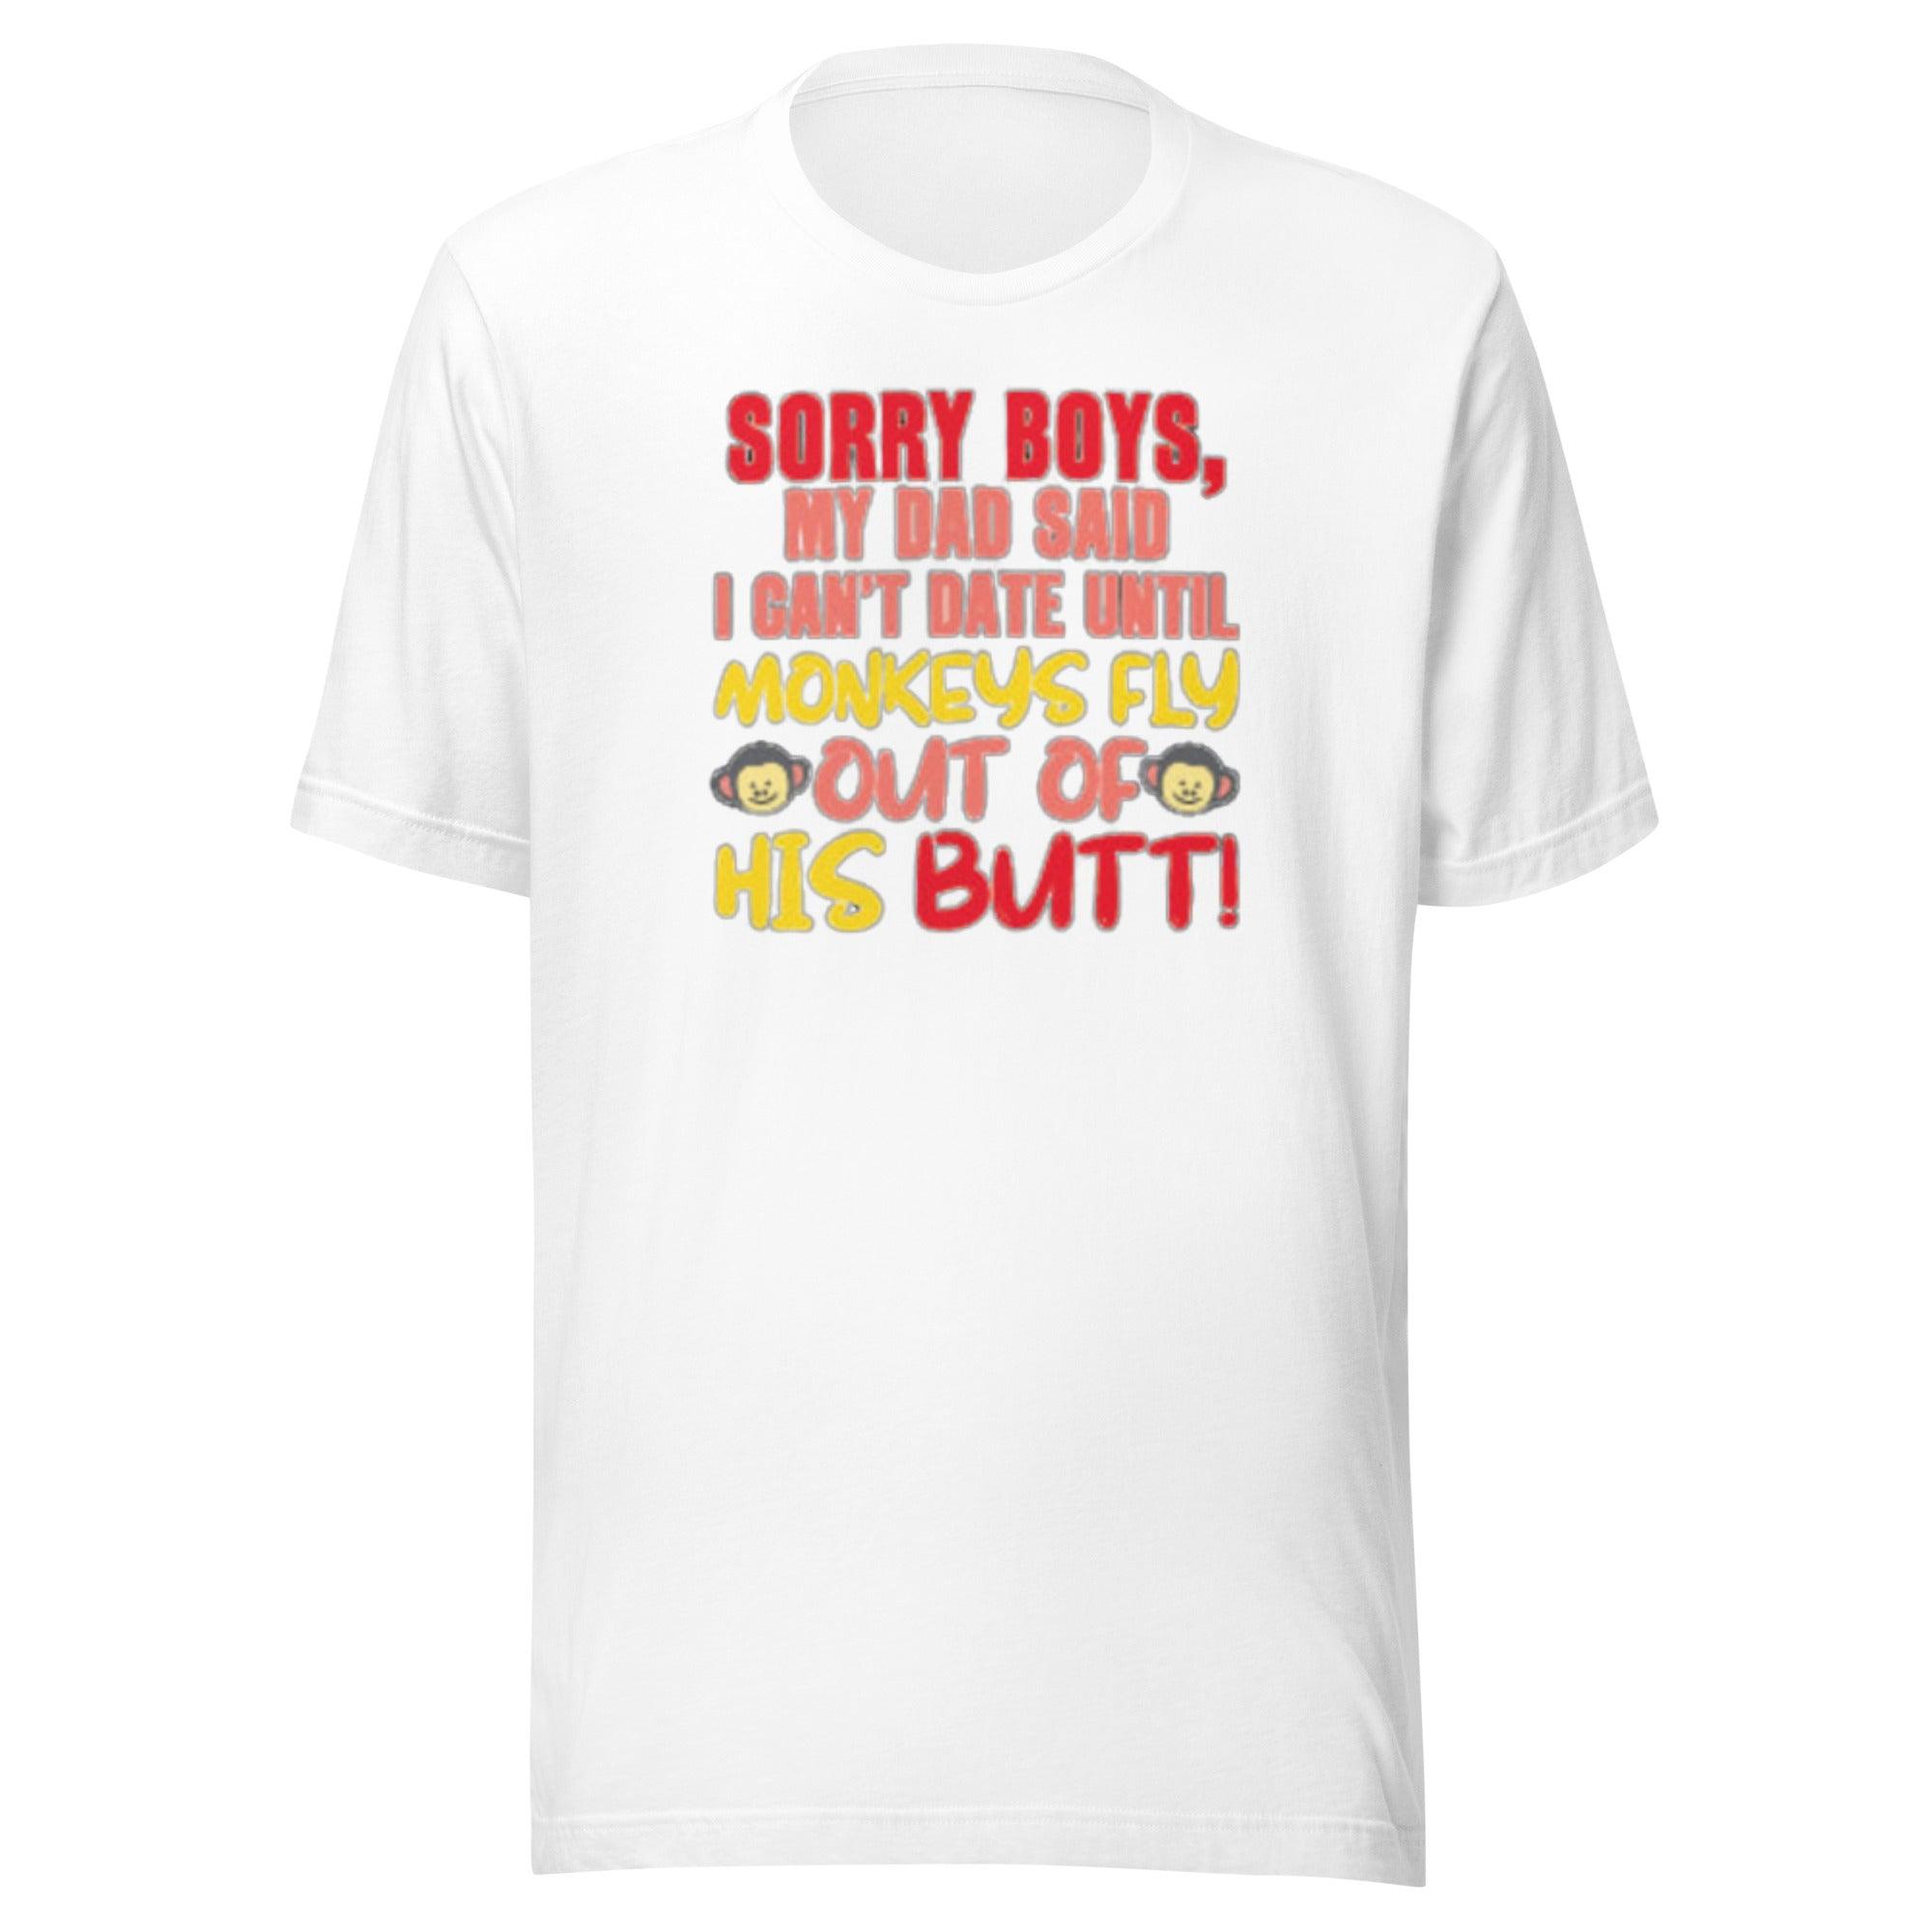 Dad Said I Can't Date Until Monkeys Fly Out of His Butt Short Sleeve Top